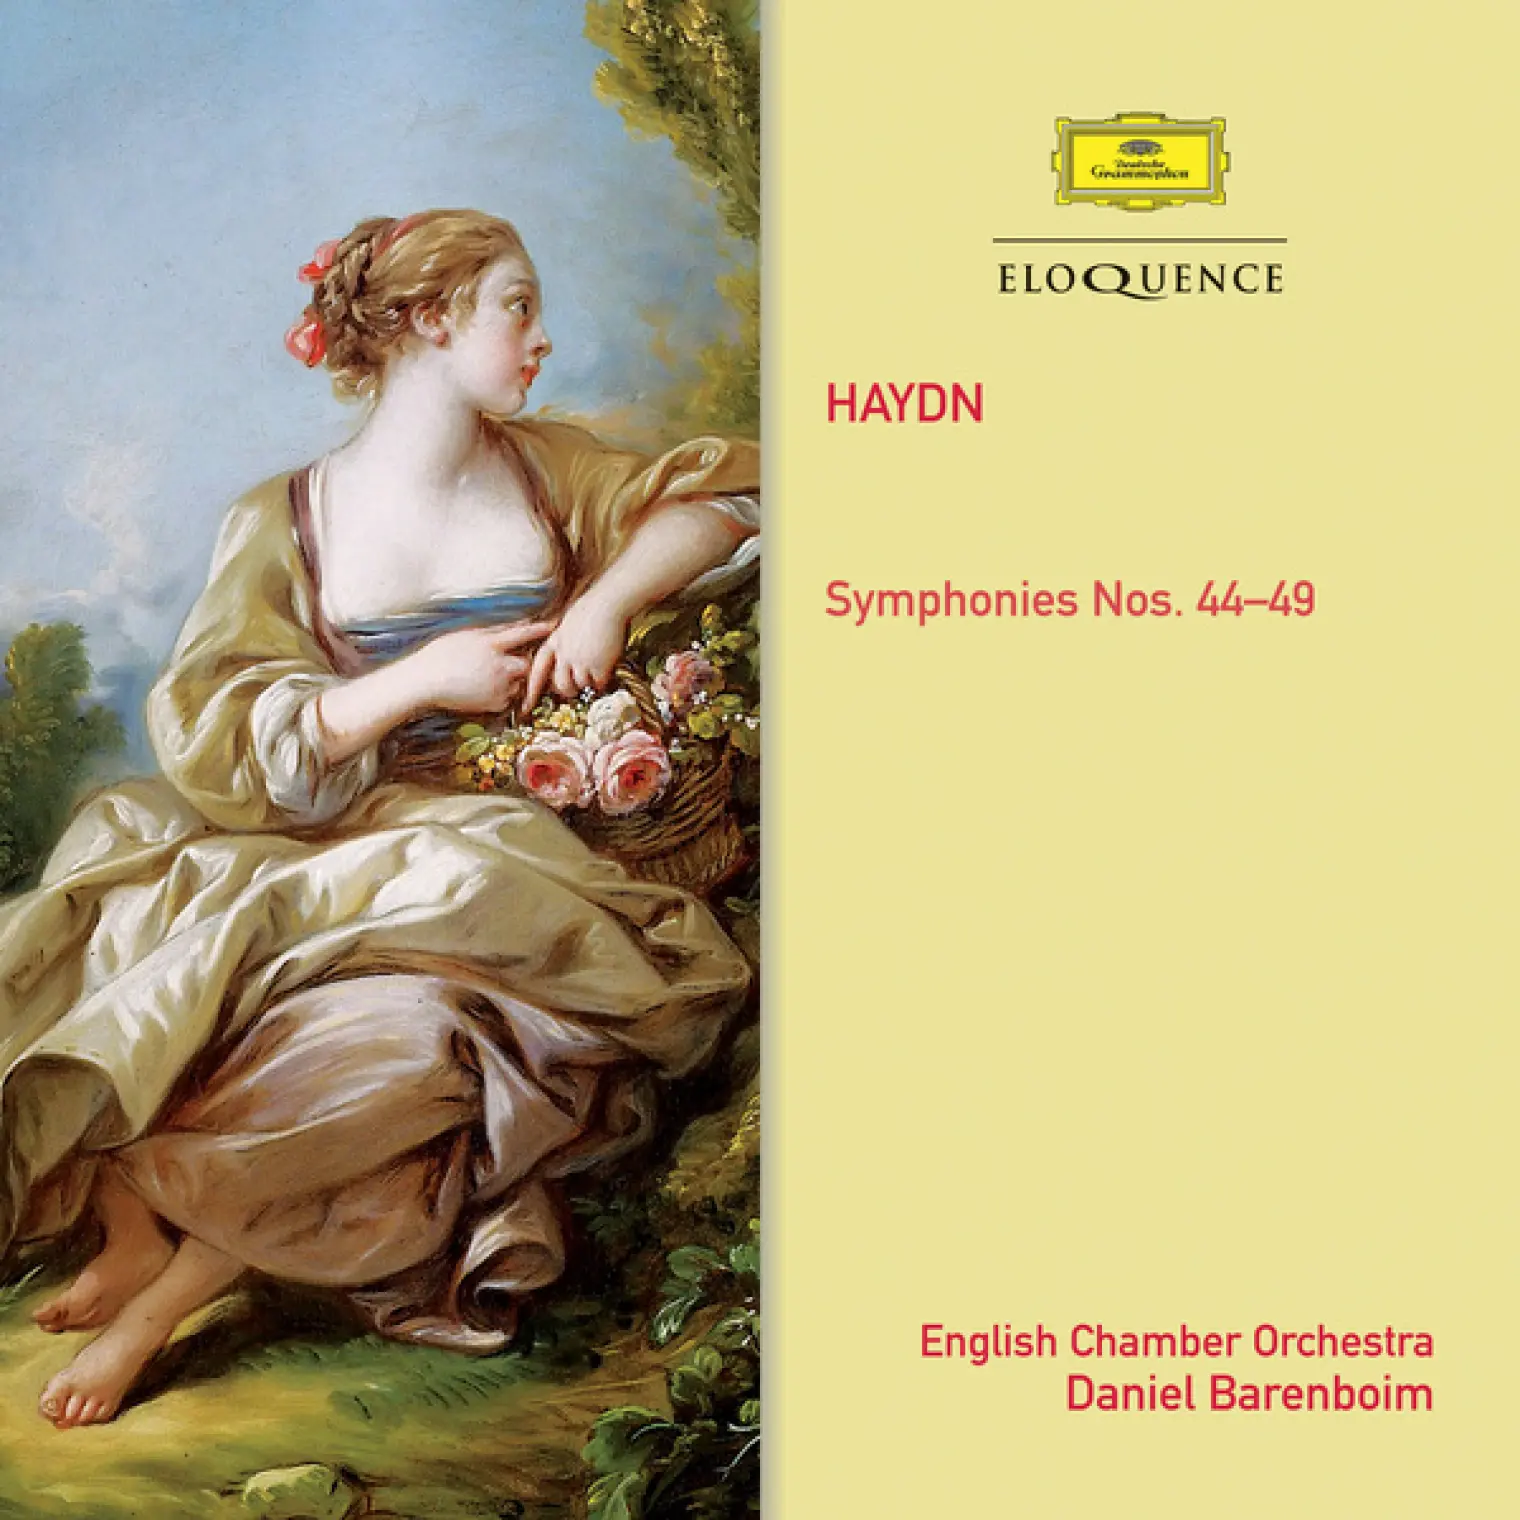 Haydn: Symphonies Nos. 44-49 -  English Chamber Orchestra 